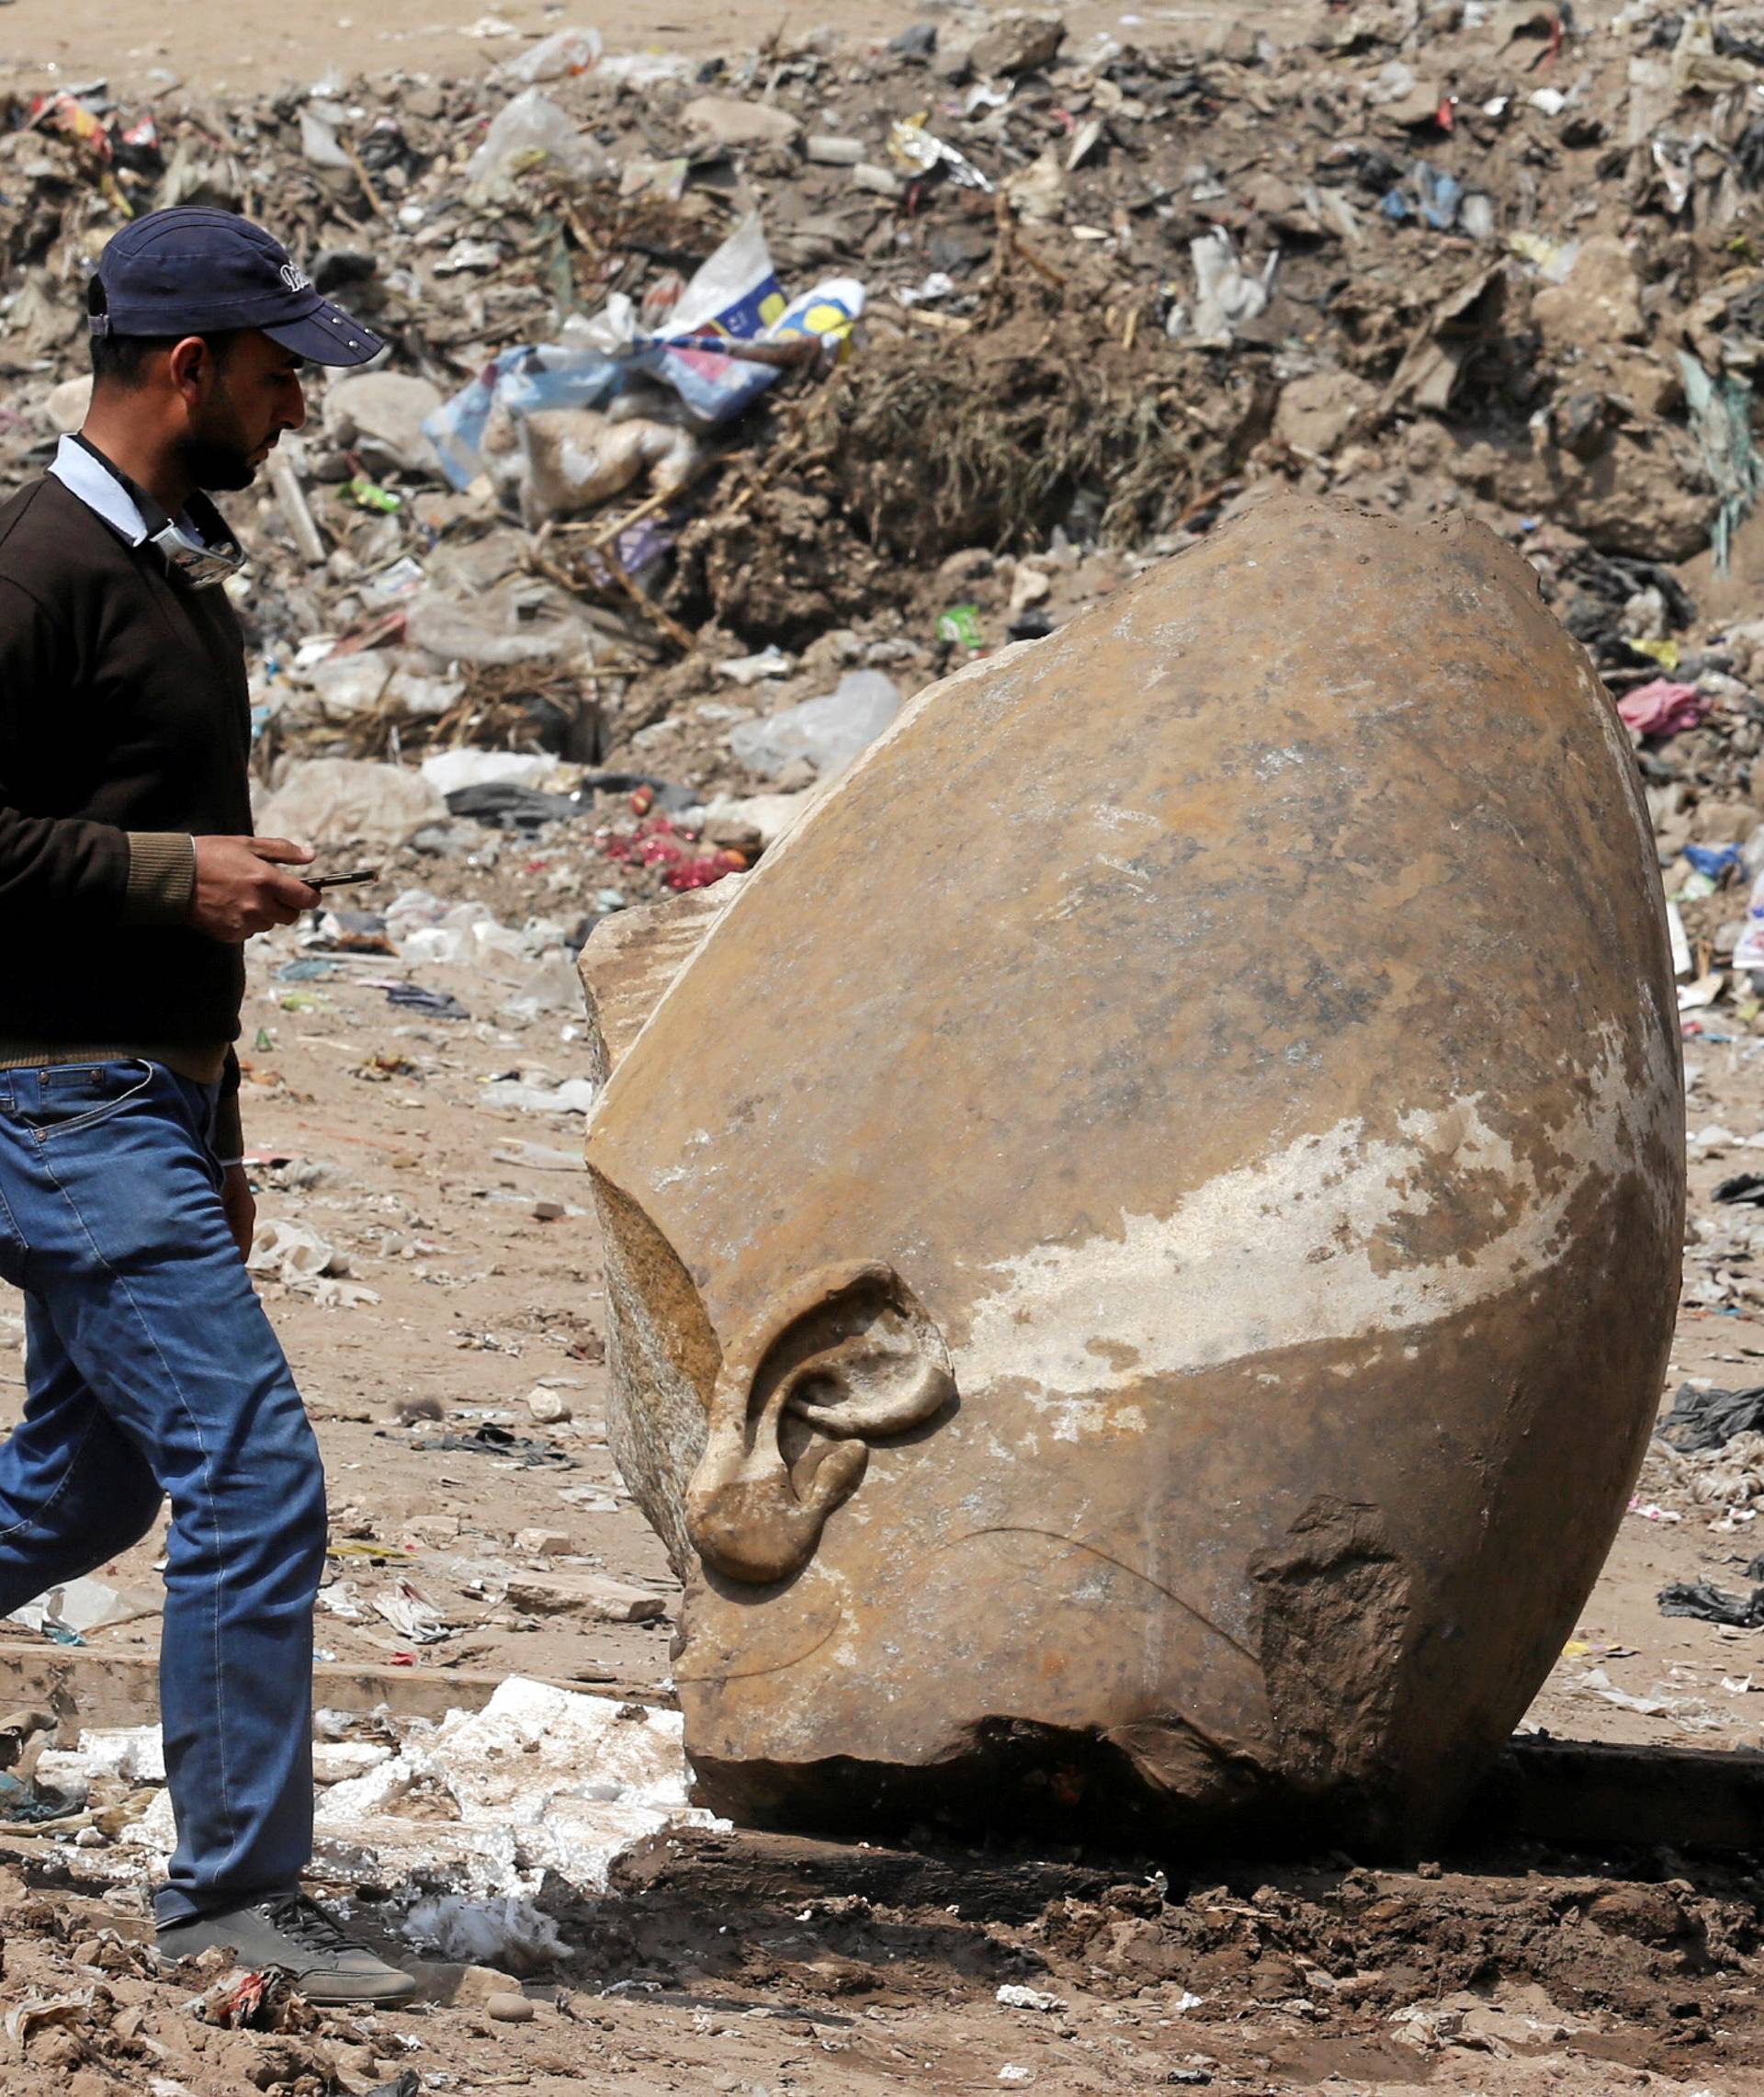 A man passes by what appears to be the head of an unearthed statue that workers say depicts Pharaoh Ramses II, in Cairo